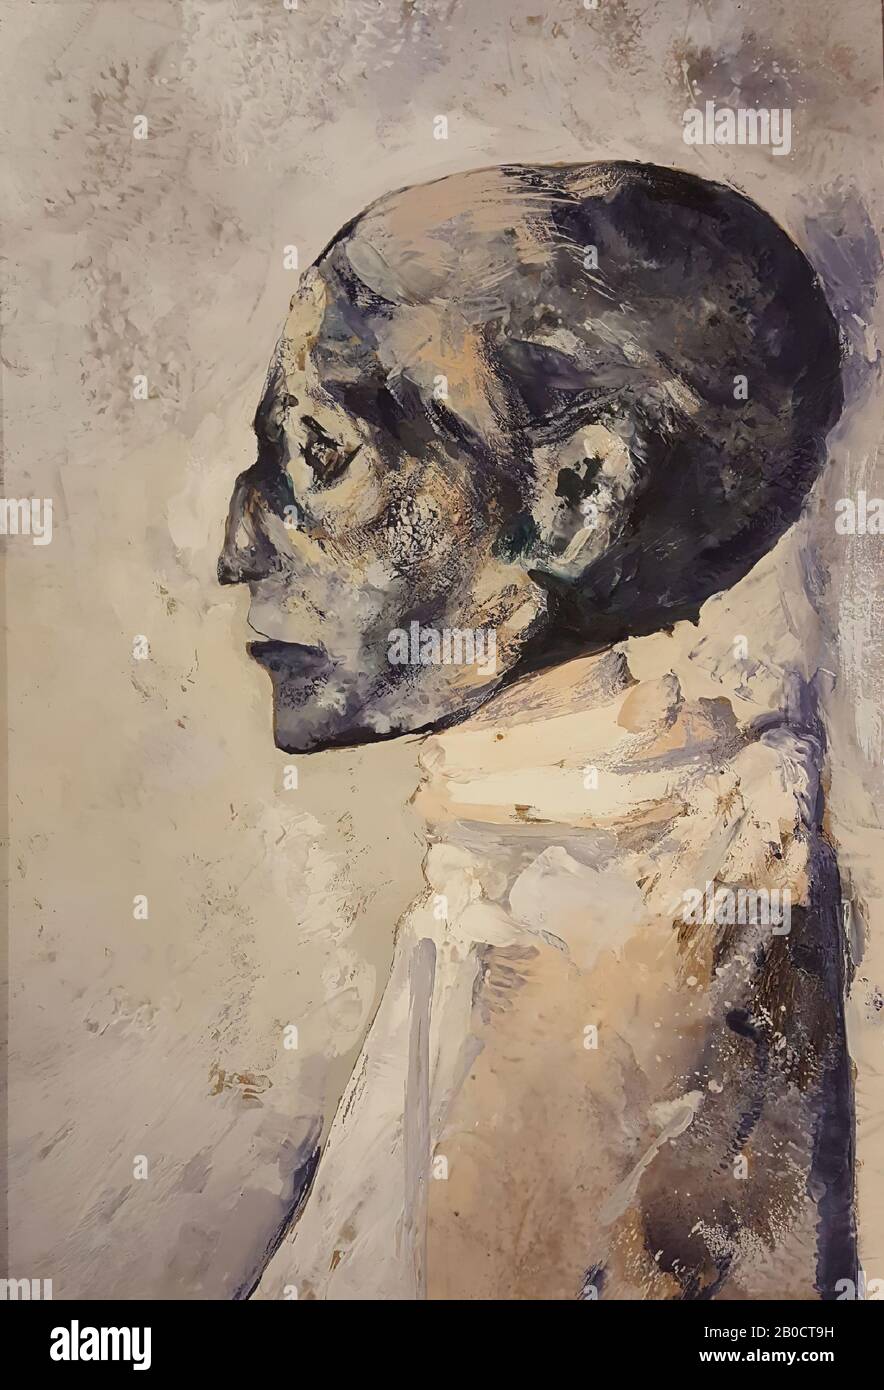 Ramses III, Painting by the artist Riky Schellart-van Deursen (1942-2013), portrait format, depicting the royal mummy of Ramses III in the Egyptian Museum in Cairo (CG 61083). Pictured is the upper body and profile from the right, lying under a predominantly white shroud with the uncovered head, the latter painted in dark shades, against a dark background., Painted in encaustic on panel of hardboard, framed in blank wooden frame. Marked on the back in pencil: Riky Schellart-vDeursen Stock Photo